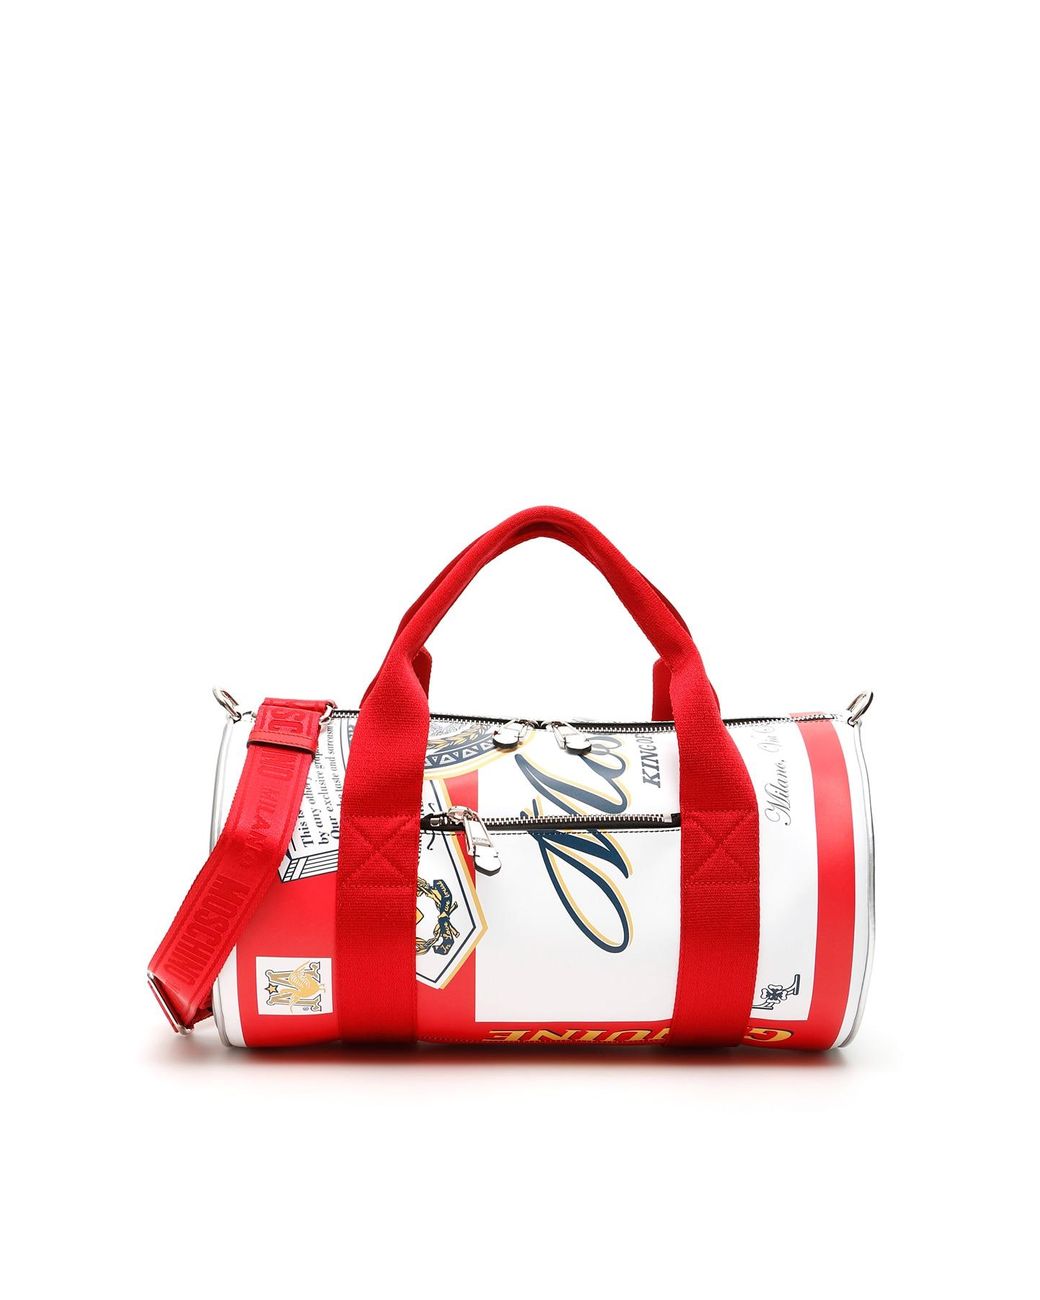 Moschino Budweiser Duffle Bag in Red | Lyst